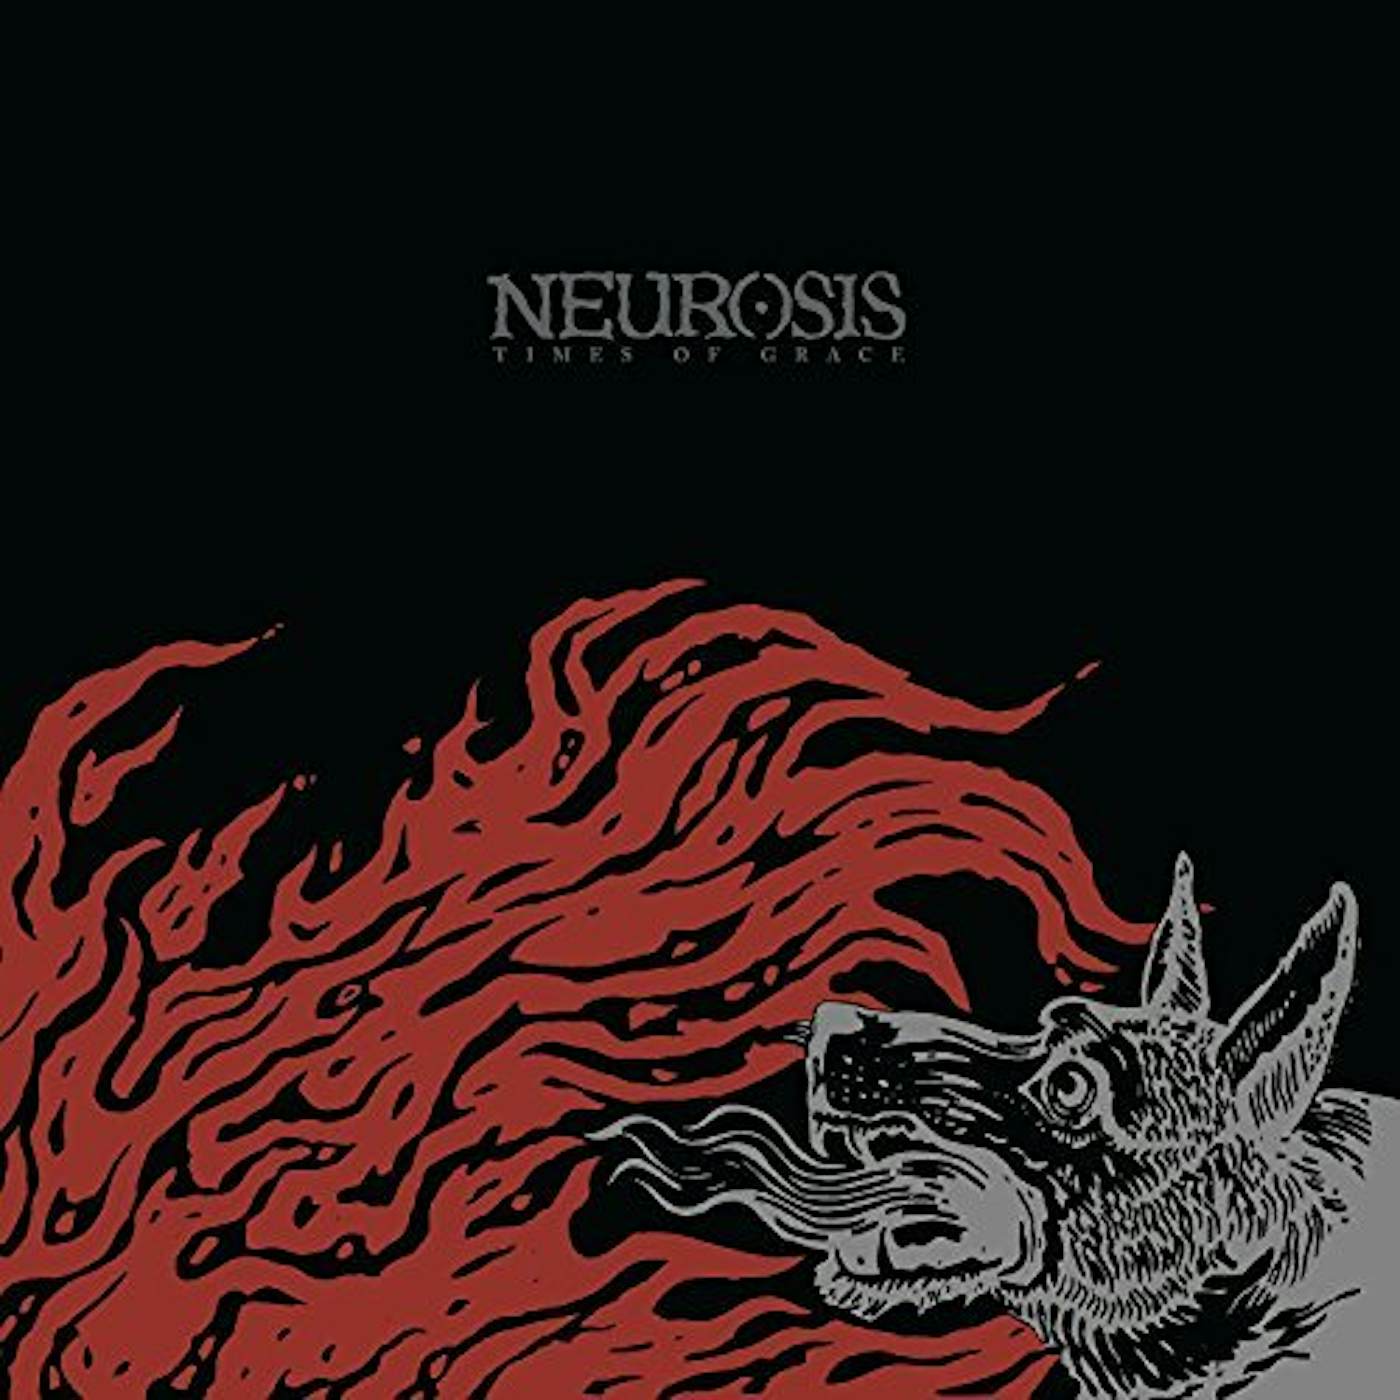 Neurosis TIMES OF GRACE Vinyl Record - UK Release